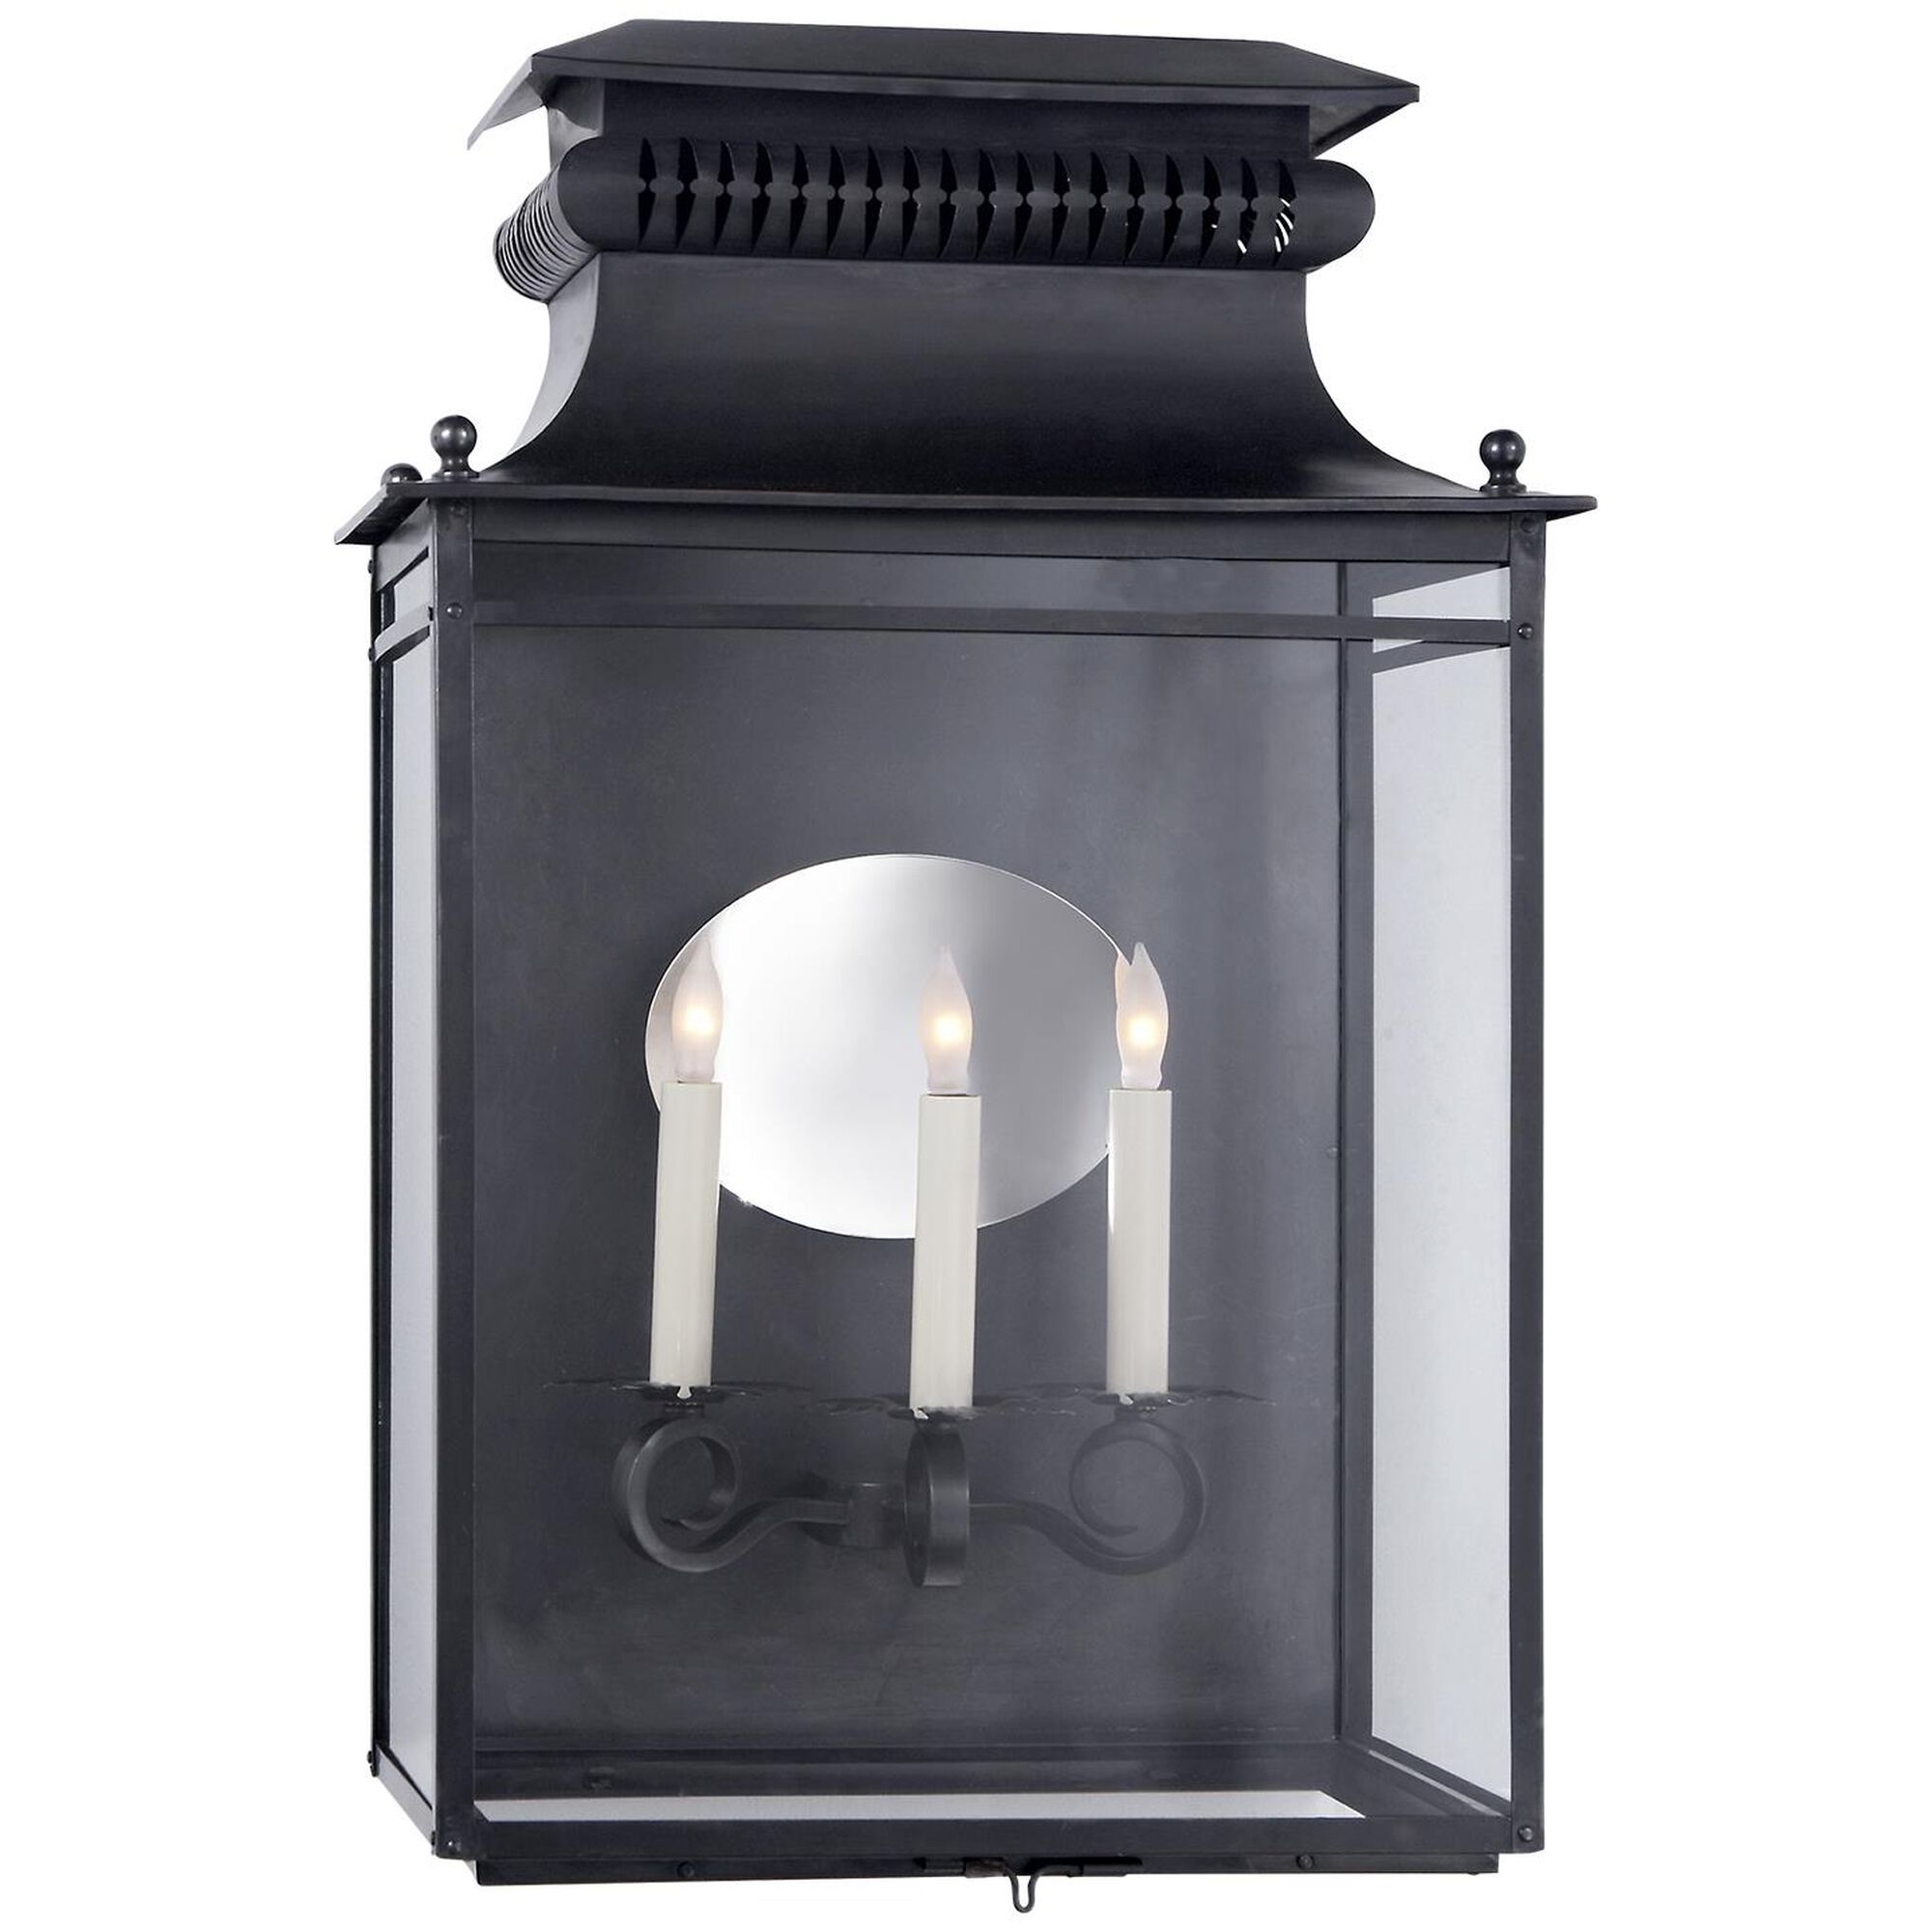 Suzanne Kasler Honore 24 Inch Tall 3 Light Outdoor Wall Light by Visual Comfort and Co. | Capitol Lighting 1800lighting.com